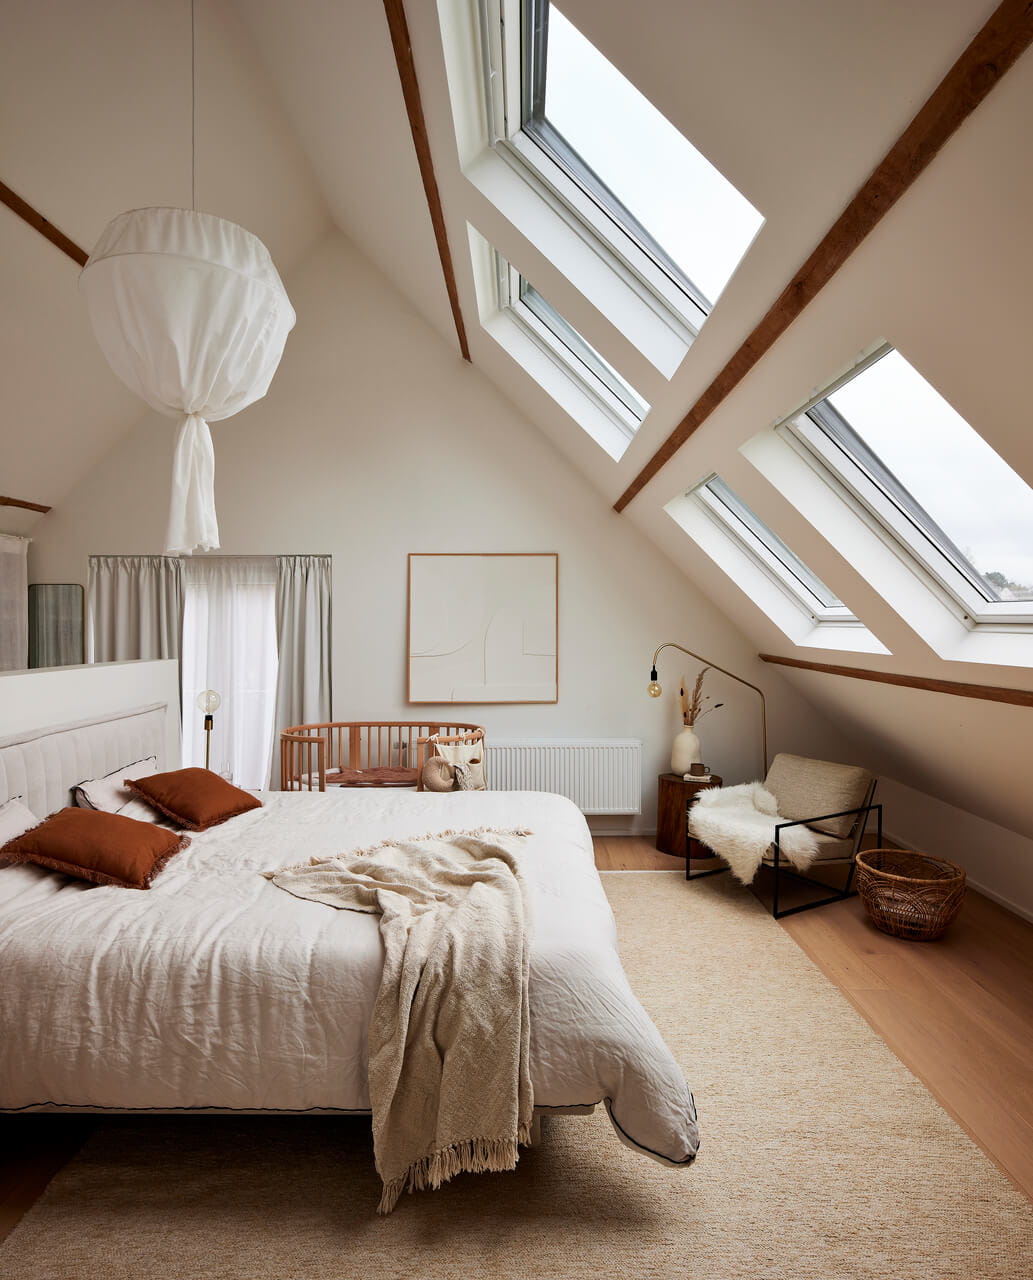 Very bright and sunny bedroom in the attic with roof windows.